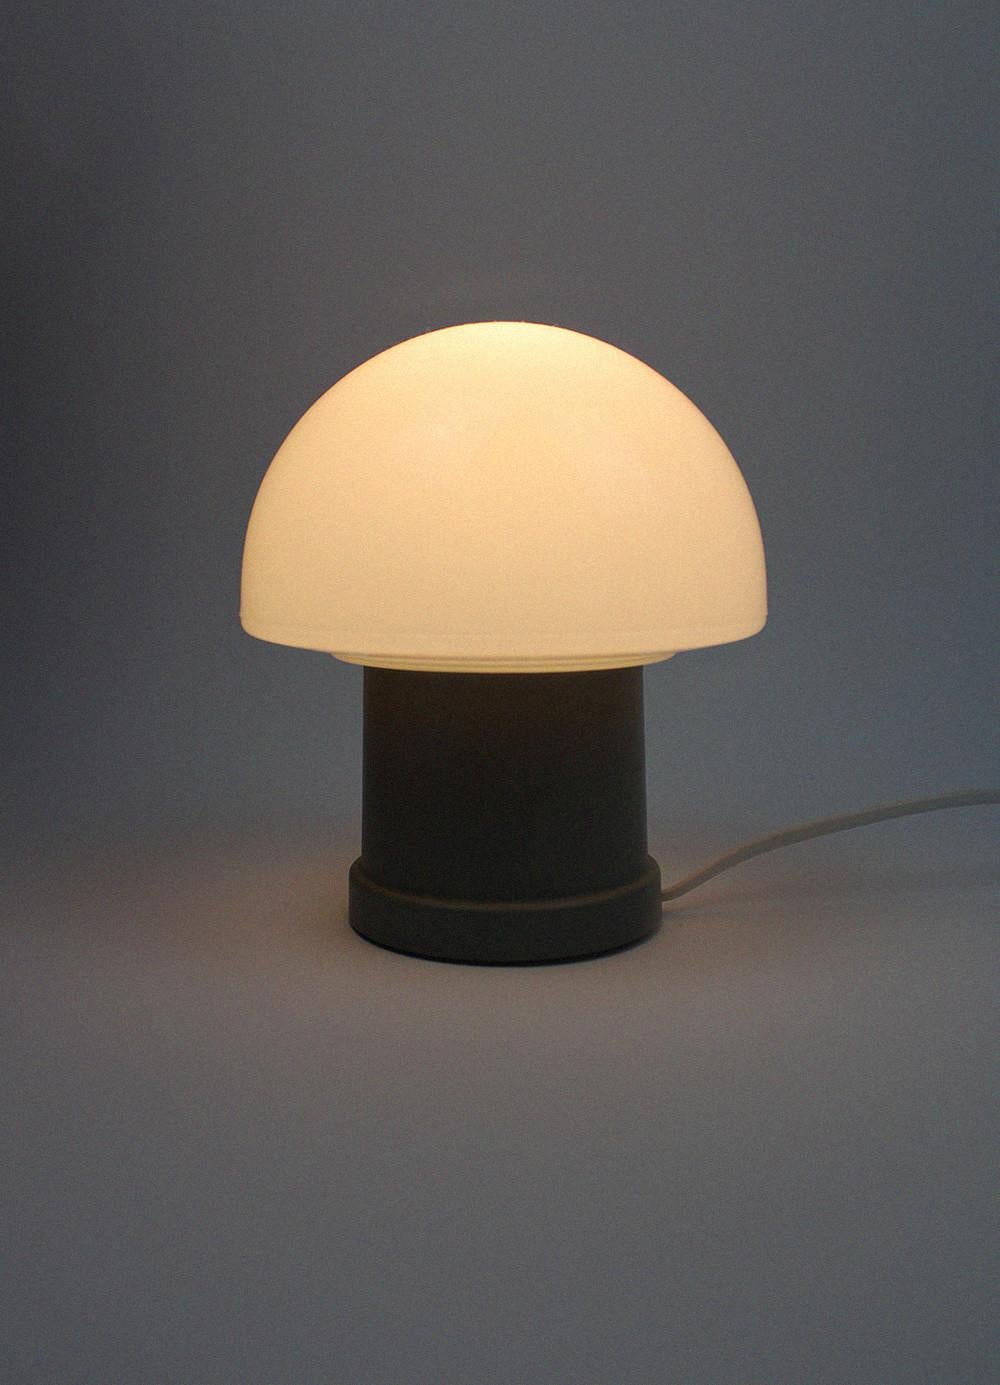 This entertaining desk or table lamp by Belgian manufacturer MASSIVE, immediately creates a cozy yet playful atmosphere thanks to its mushroom shape made of Opaline. The gray tone base is made of plastic and immediately brings the Space Age